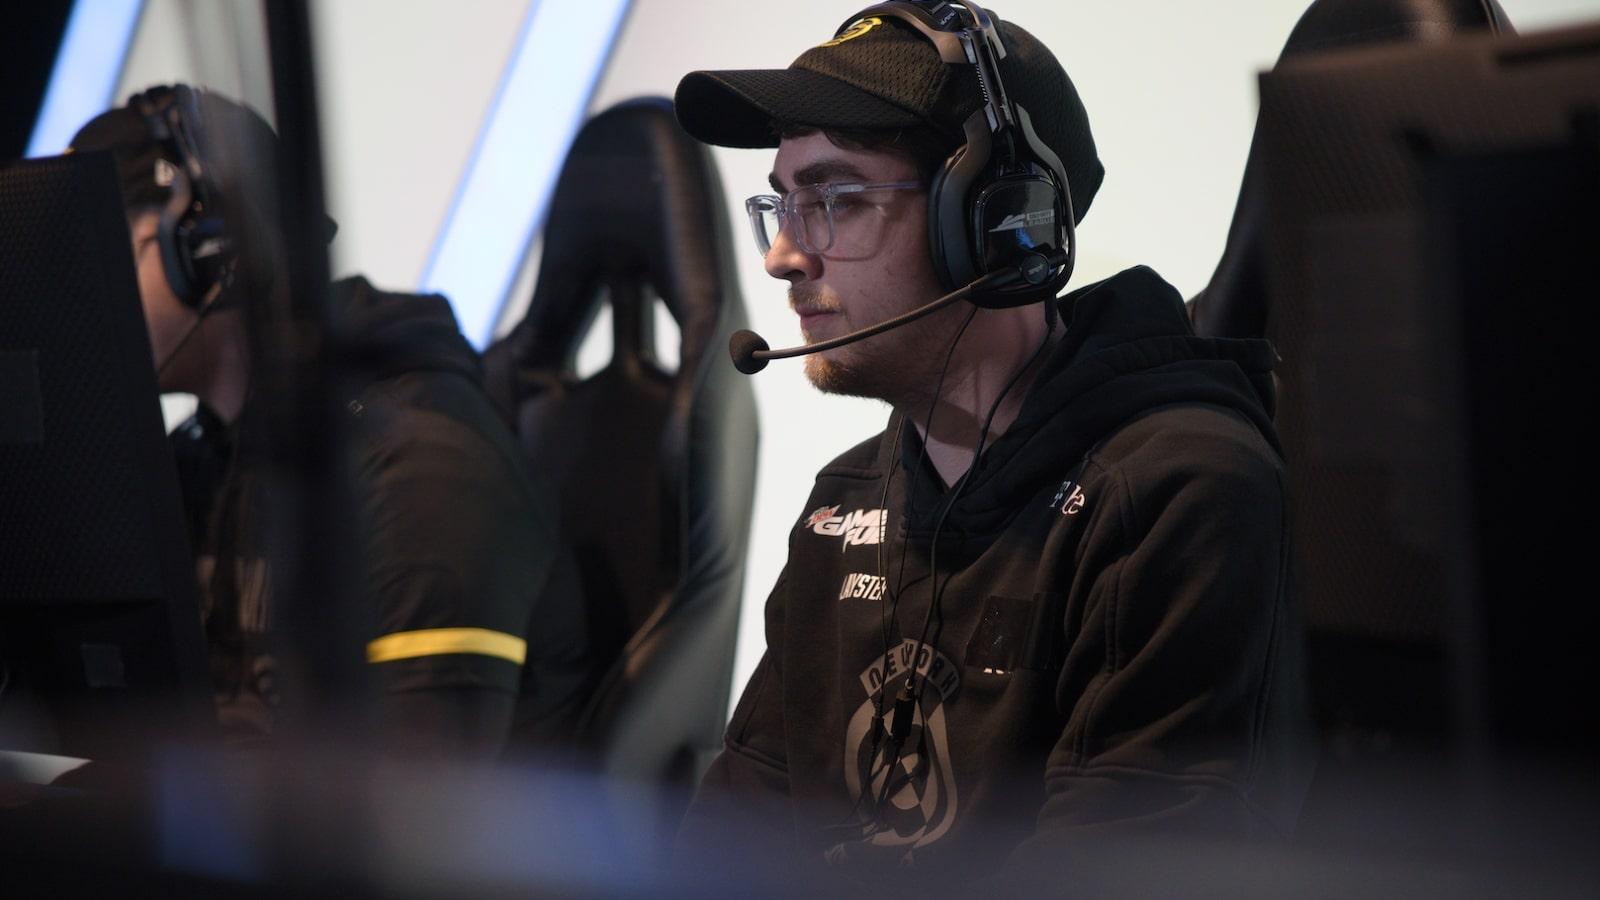 Clayster playing on CDL LAN for New York Subliners